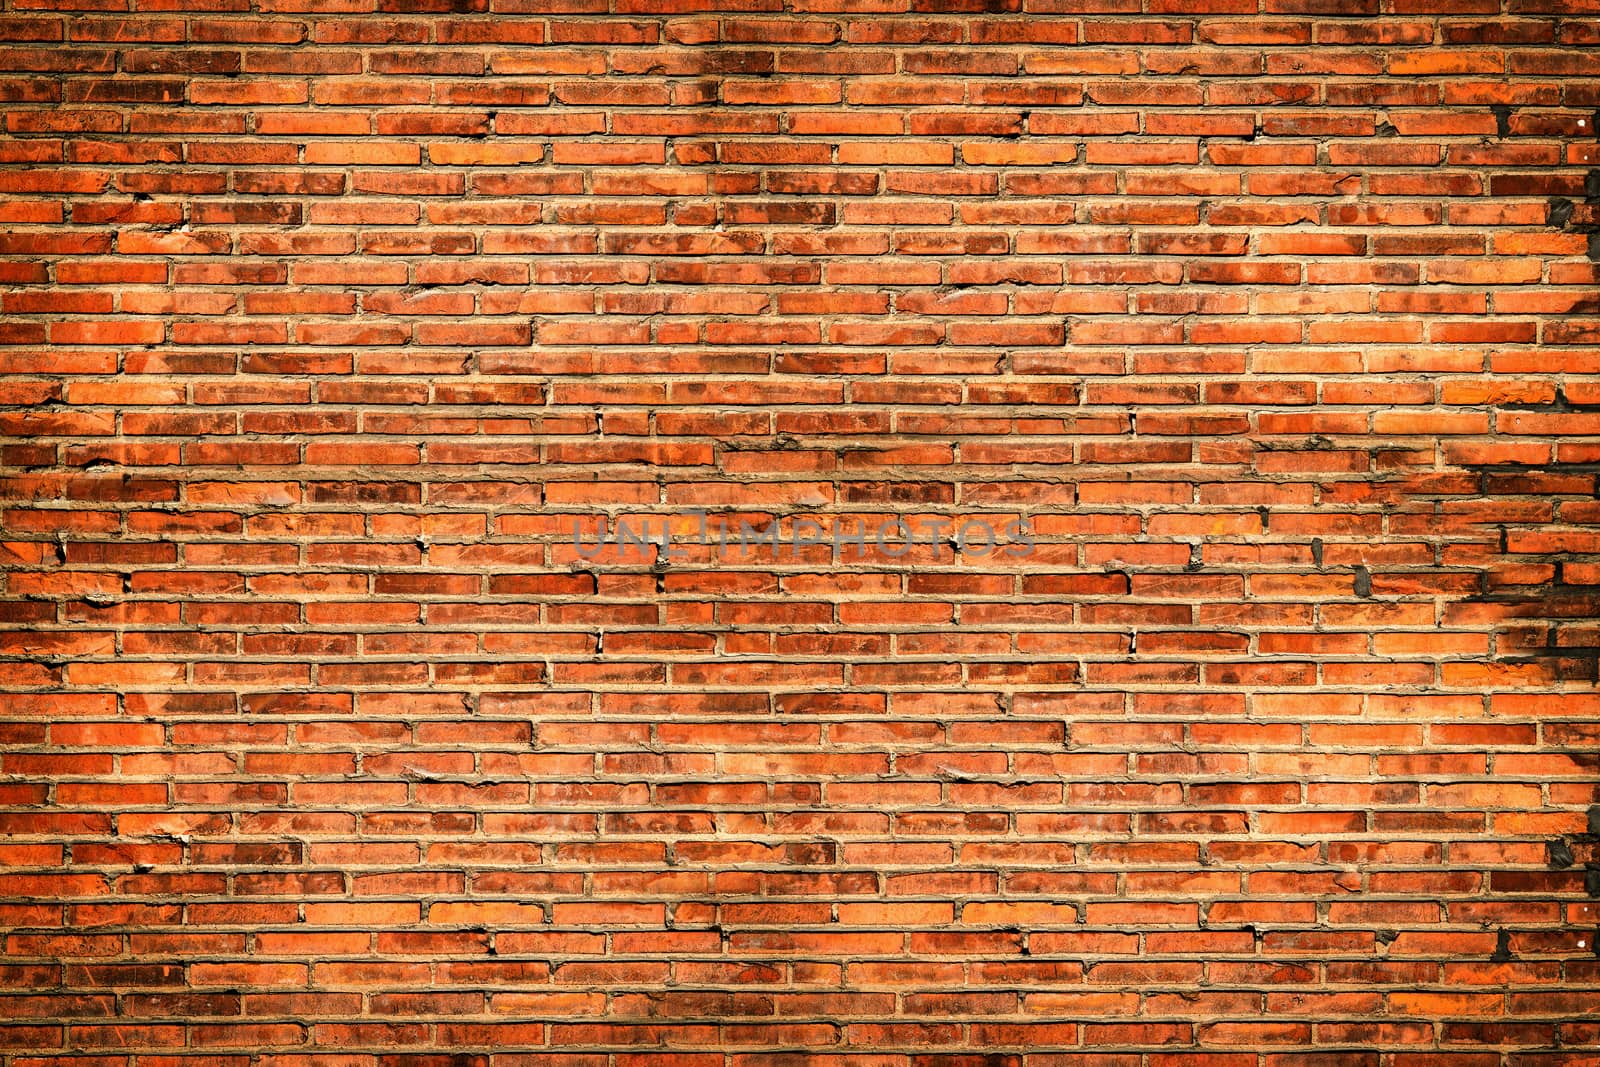 The surface of the brick from the background wall.